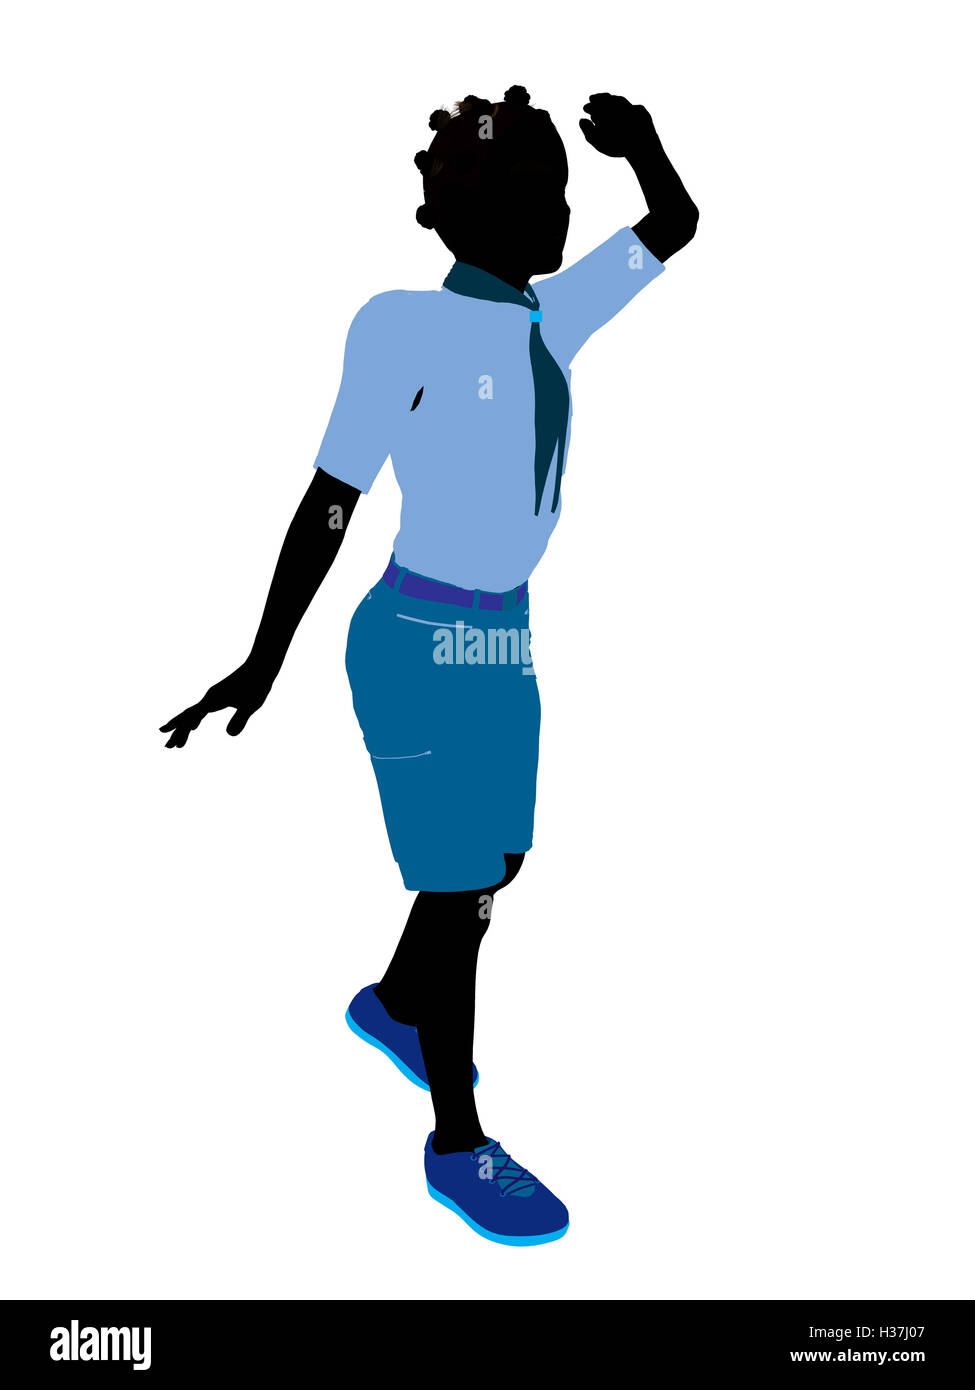 African American Girl Scout Illustration Silhouette Stock Photo